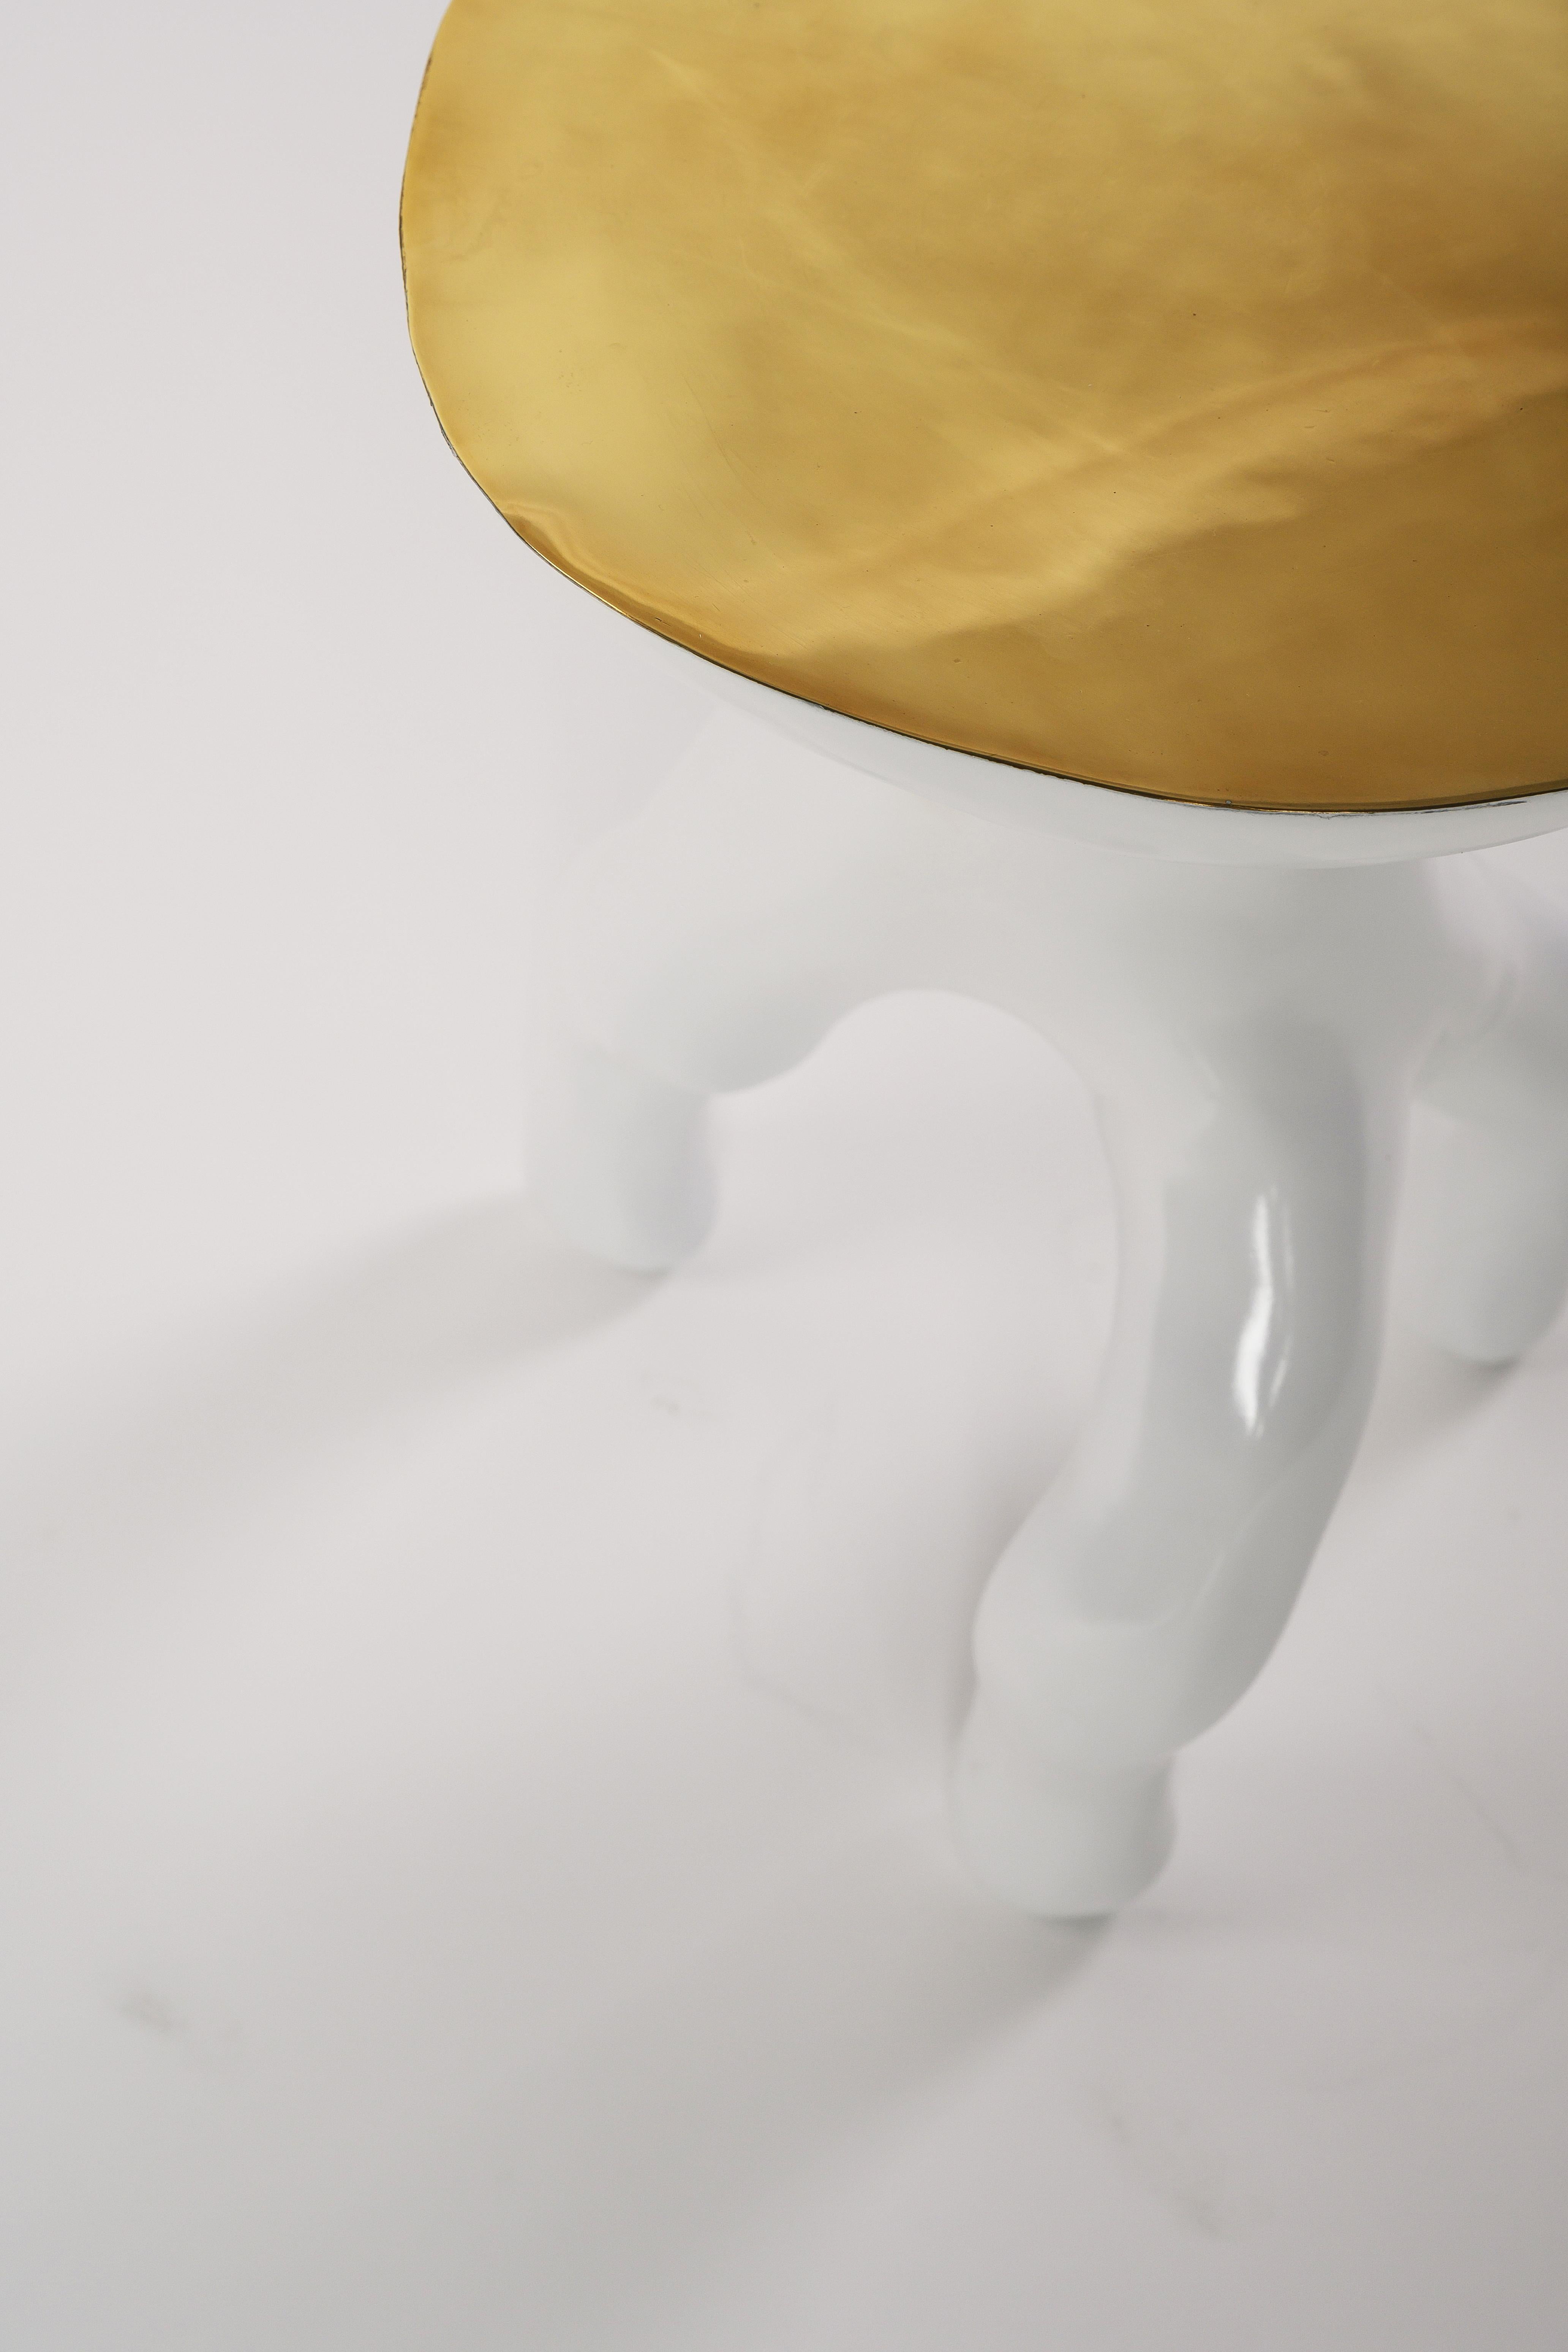 European White and Gold Sculptural Luca Side Table / Stool by Elan Atelier (Preorder) For Sale